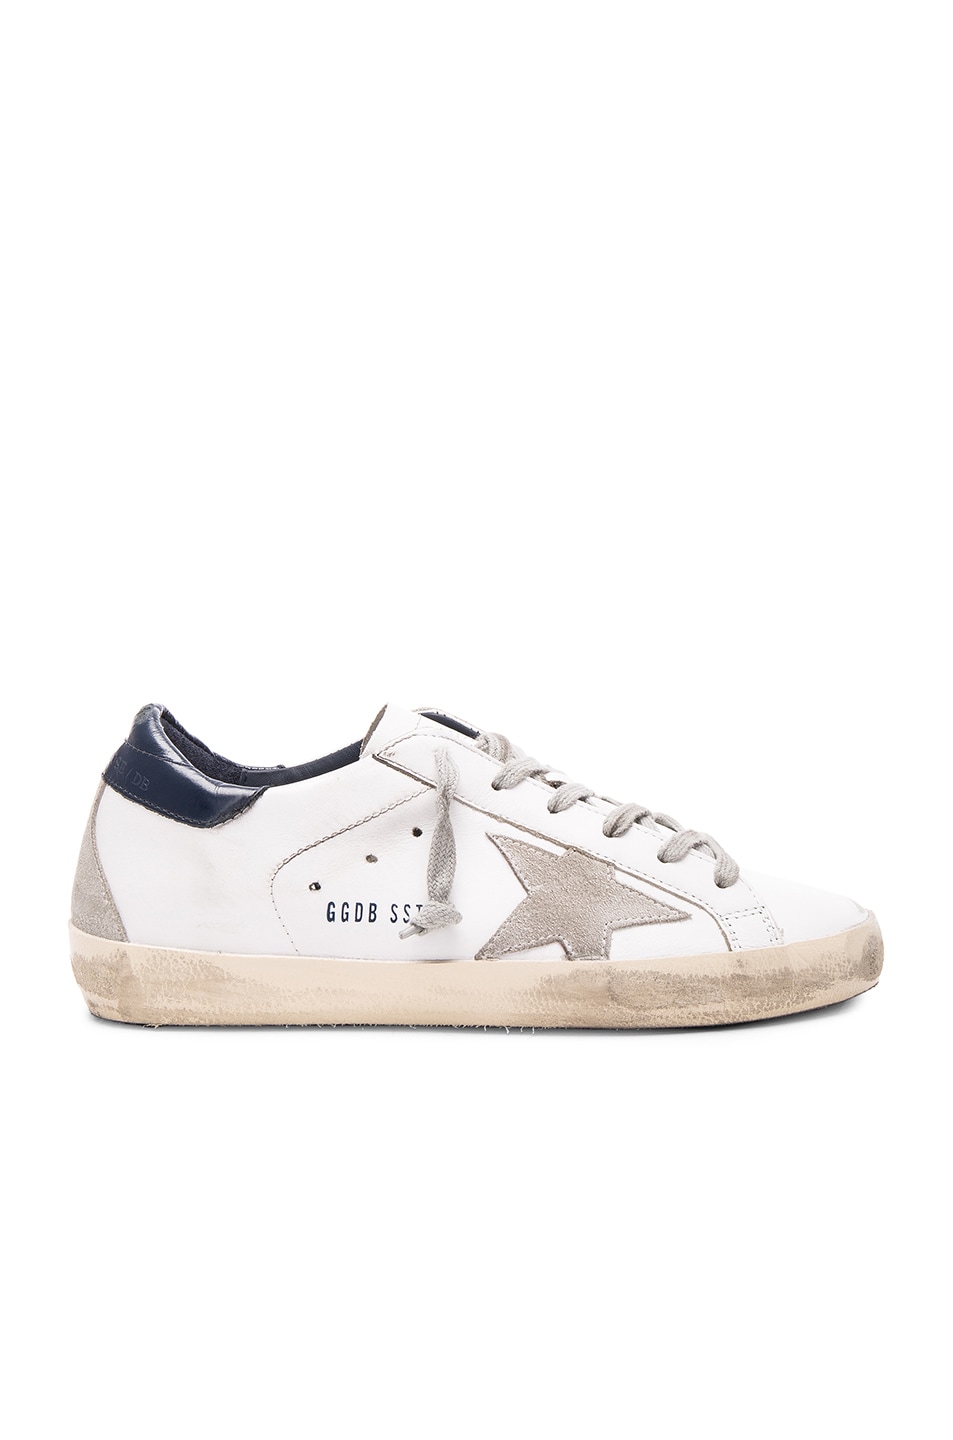 GOLDEN GOOSE Super Star Distressed Suede-Paneled Leather Sneakers in ...